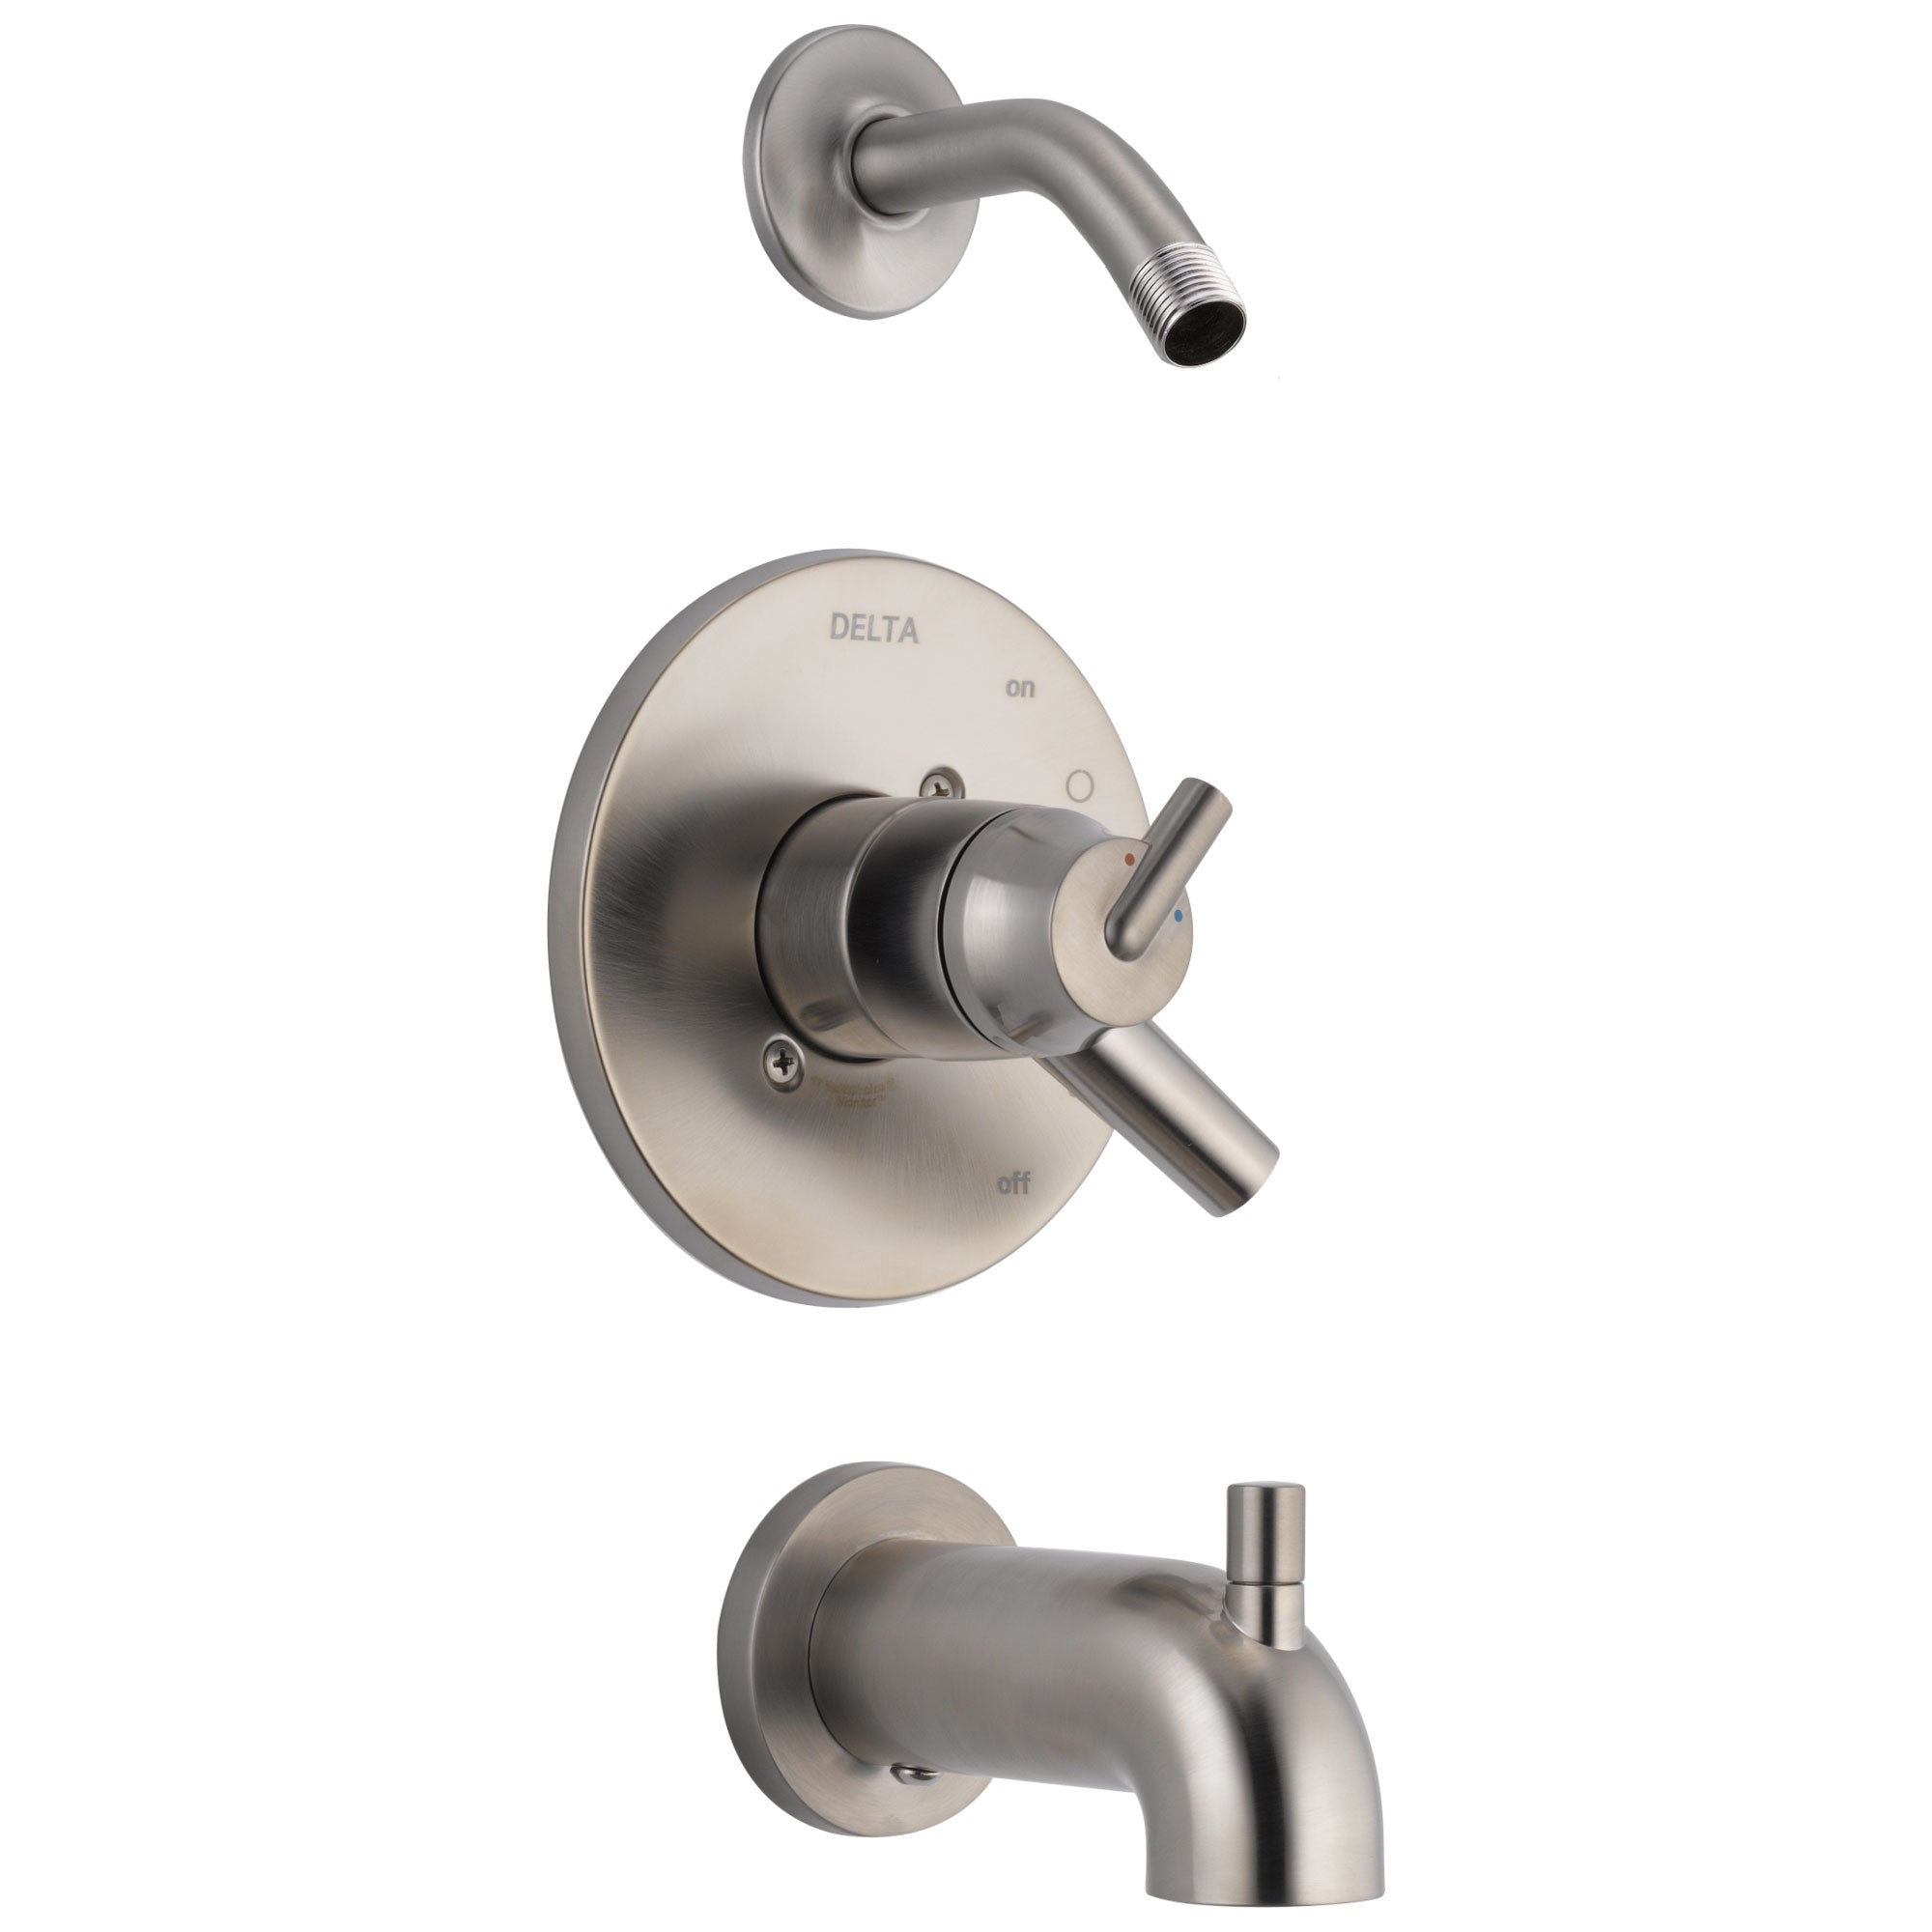 Delta Trinsic Collection Stainless Steel Finish Dual Temp and Volume Control Tub and Shower Combo Less Shower Head Includes Rough Valve with Stops D2300V